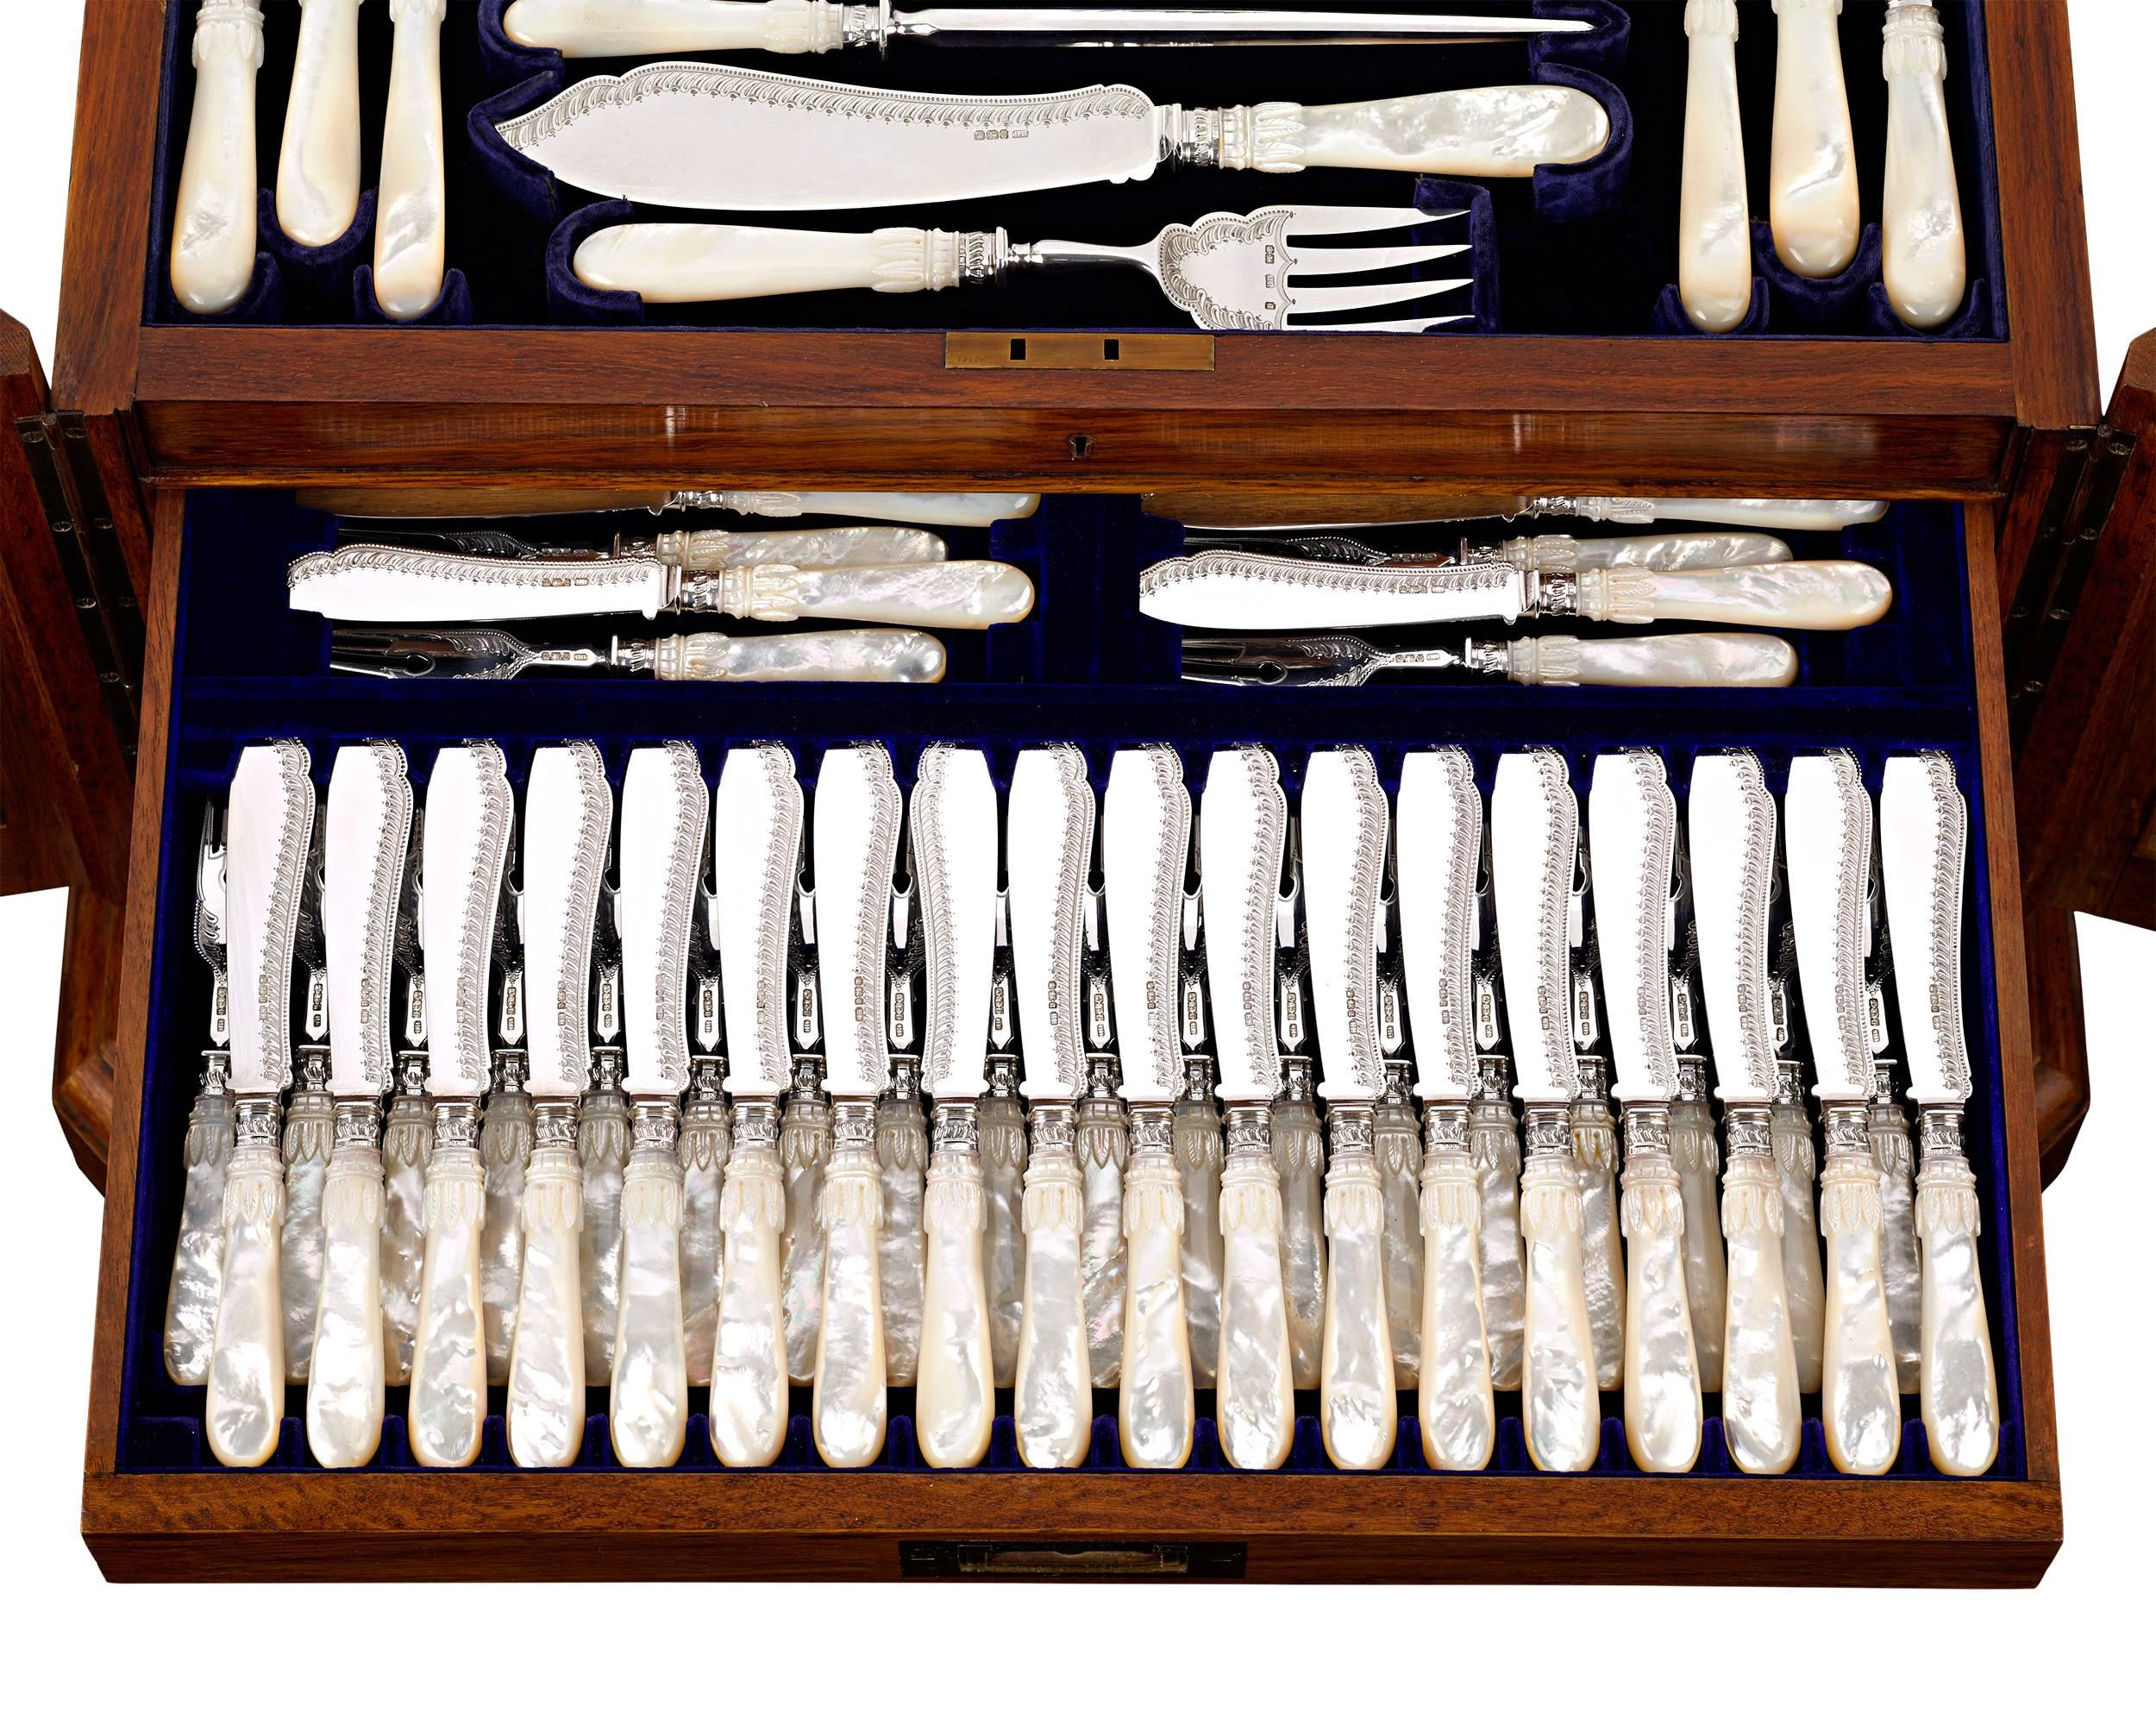 mother of pearl silverware